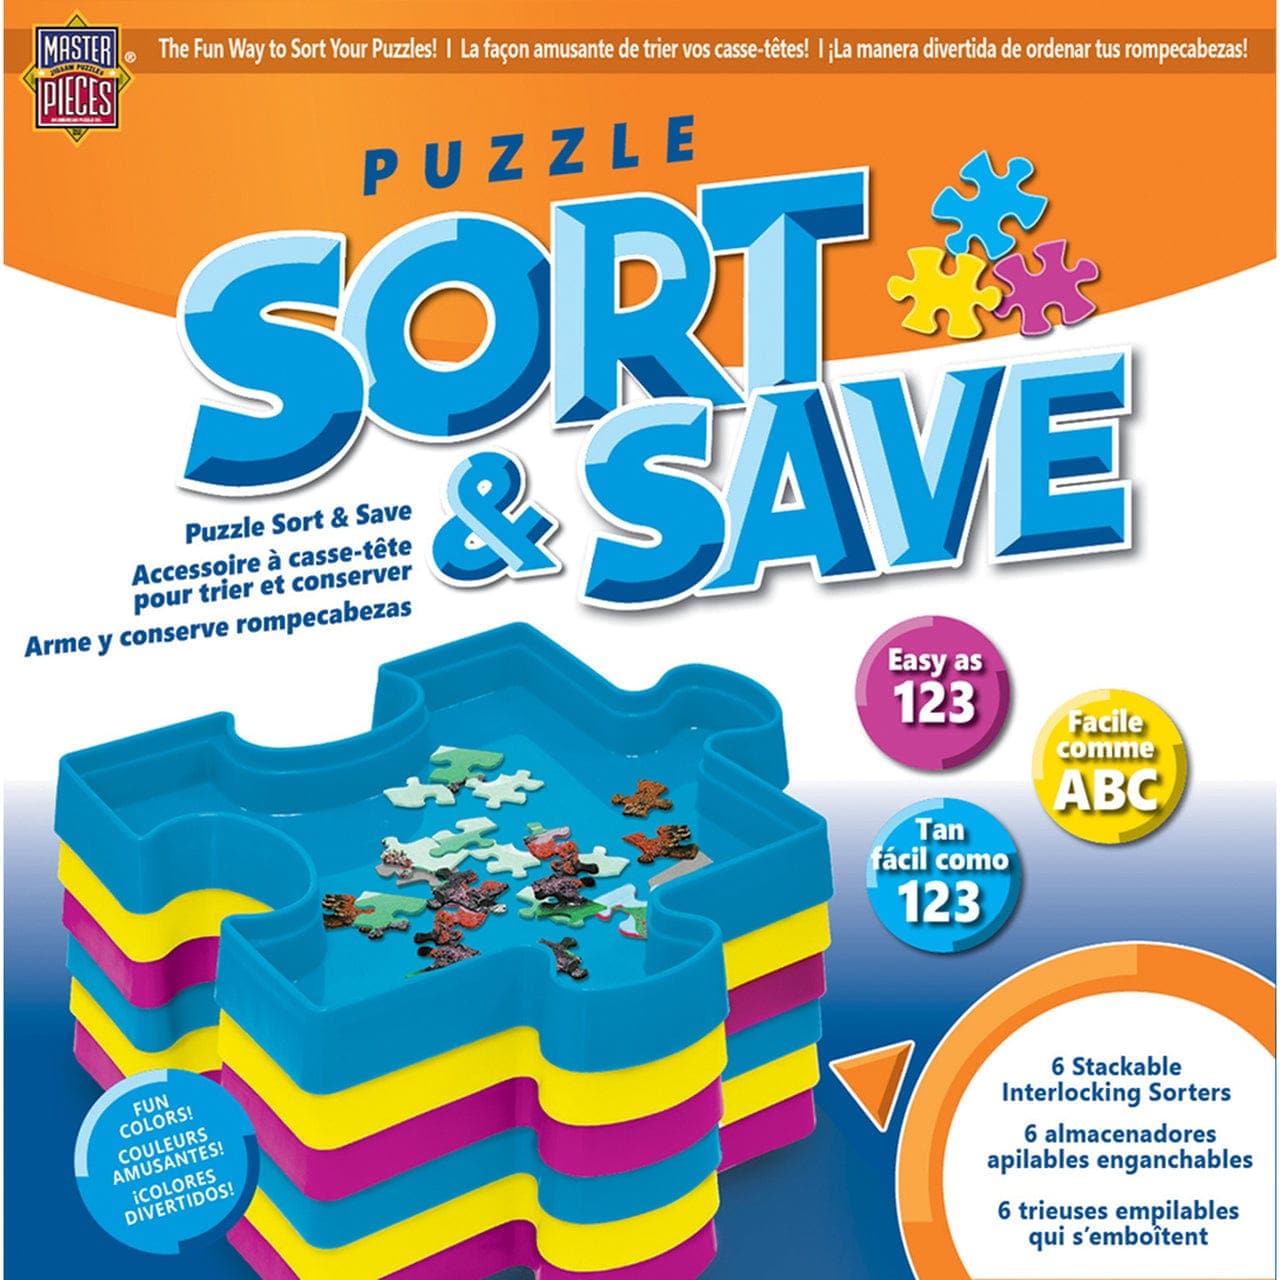 MasterPieces-Puzzle Sort & Save - 6 Stackable Interlocking Sorters-51695-Legacy Toys